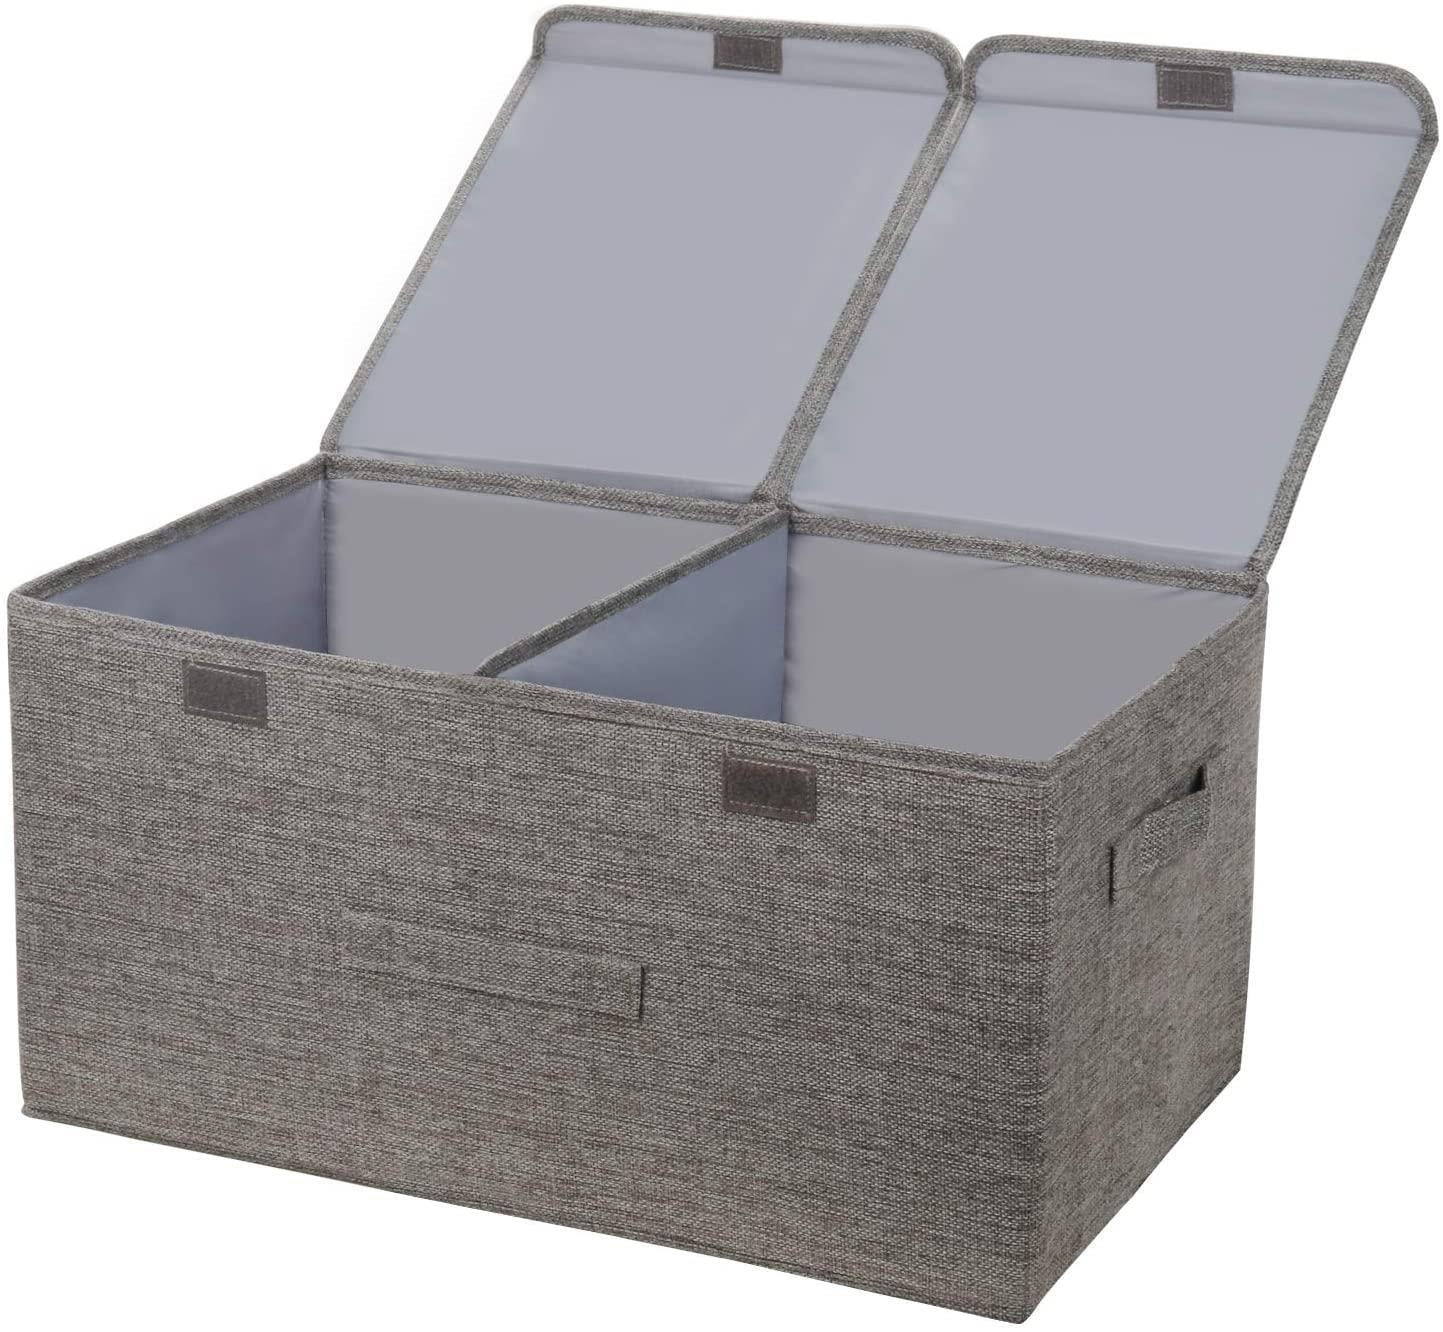 Posprica Storage Boxes Thick and Heavy Duty Foldable Organiser Cube Basket Bin 33×33×33cm/4pcs, Beige